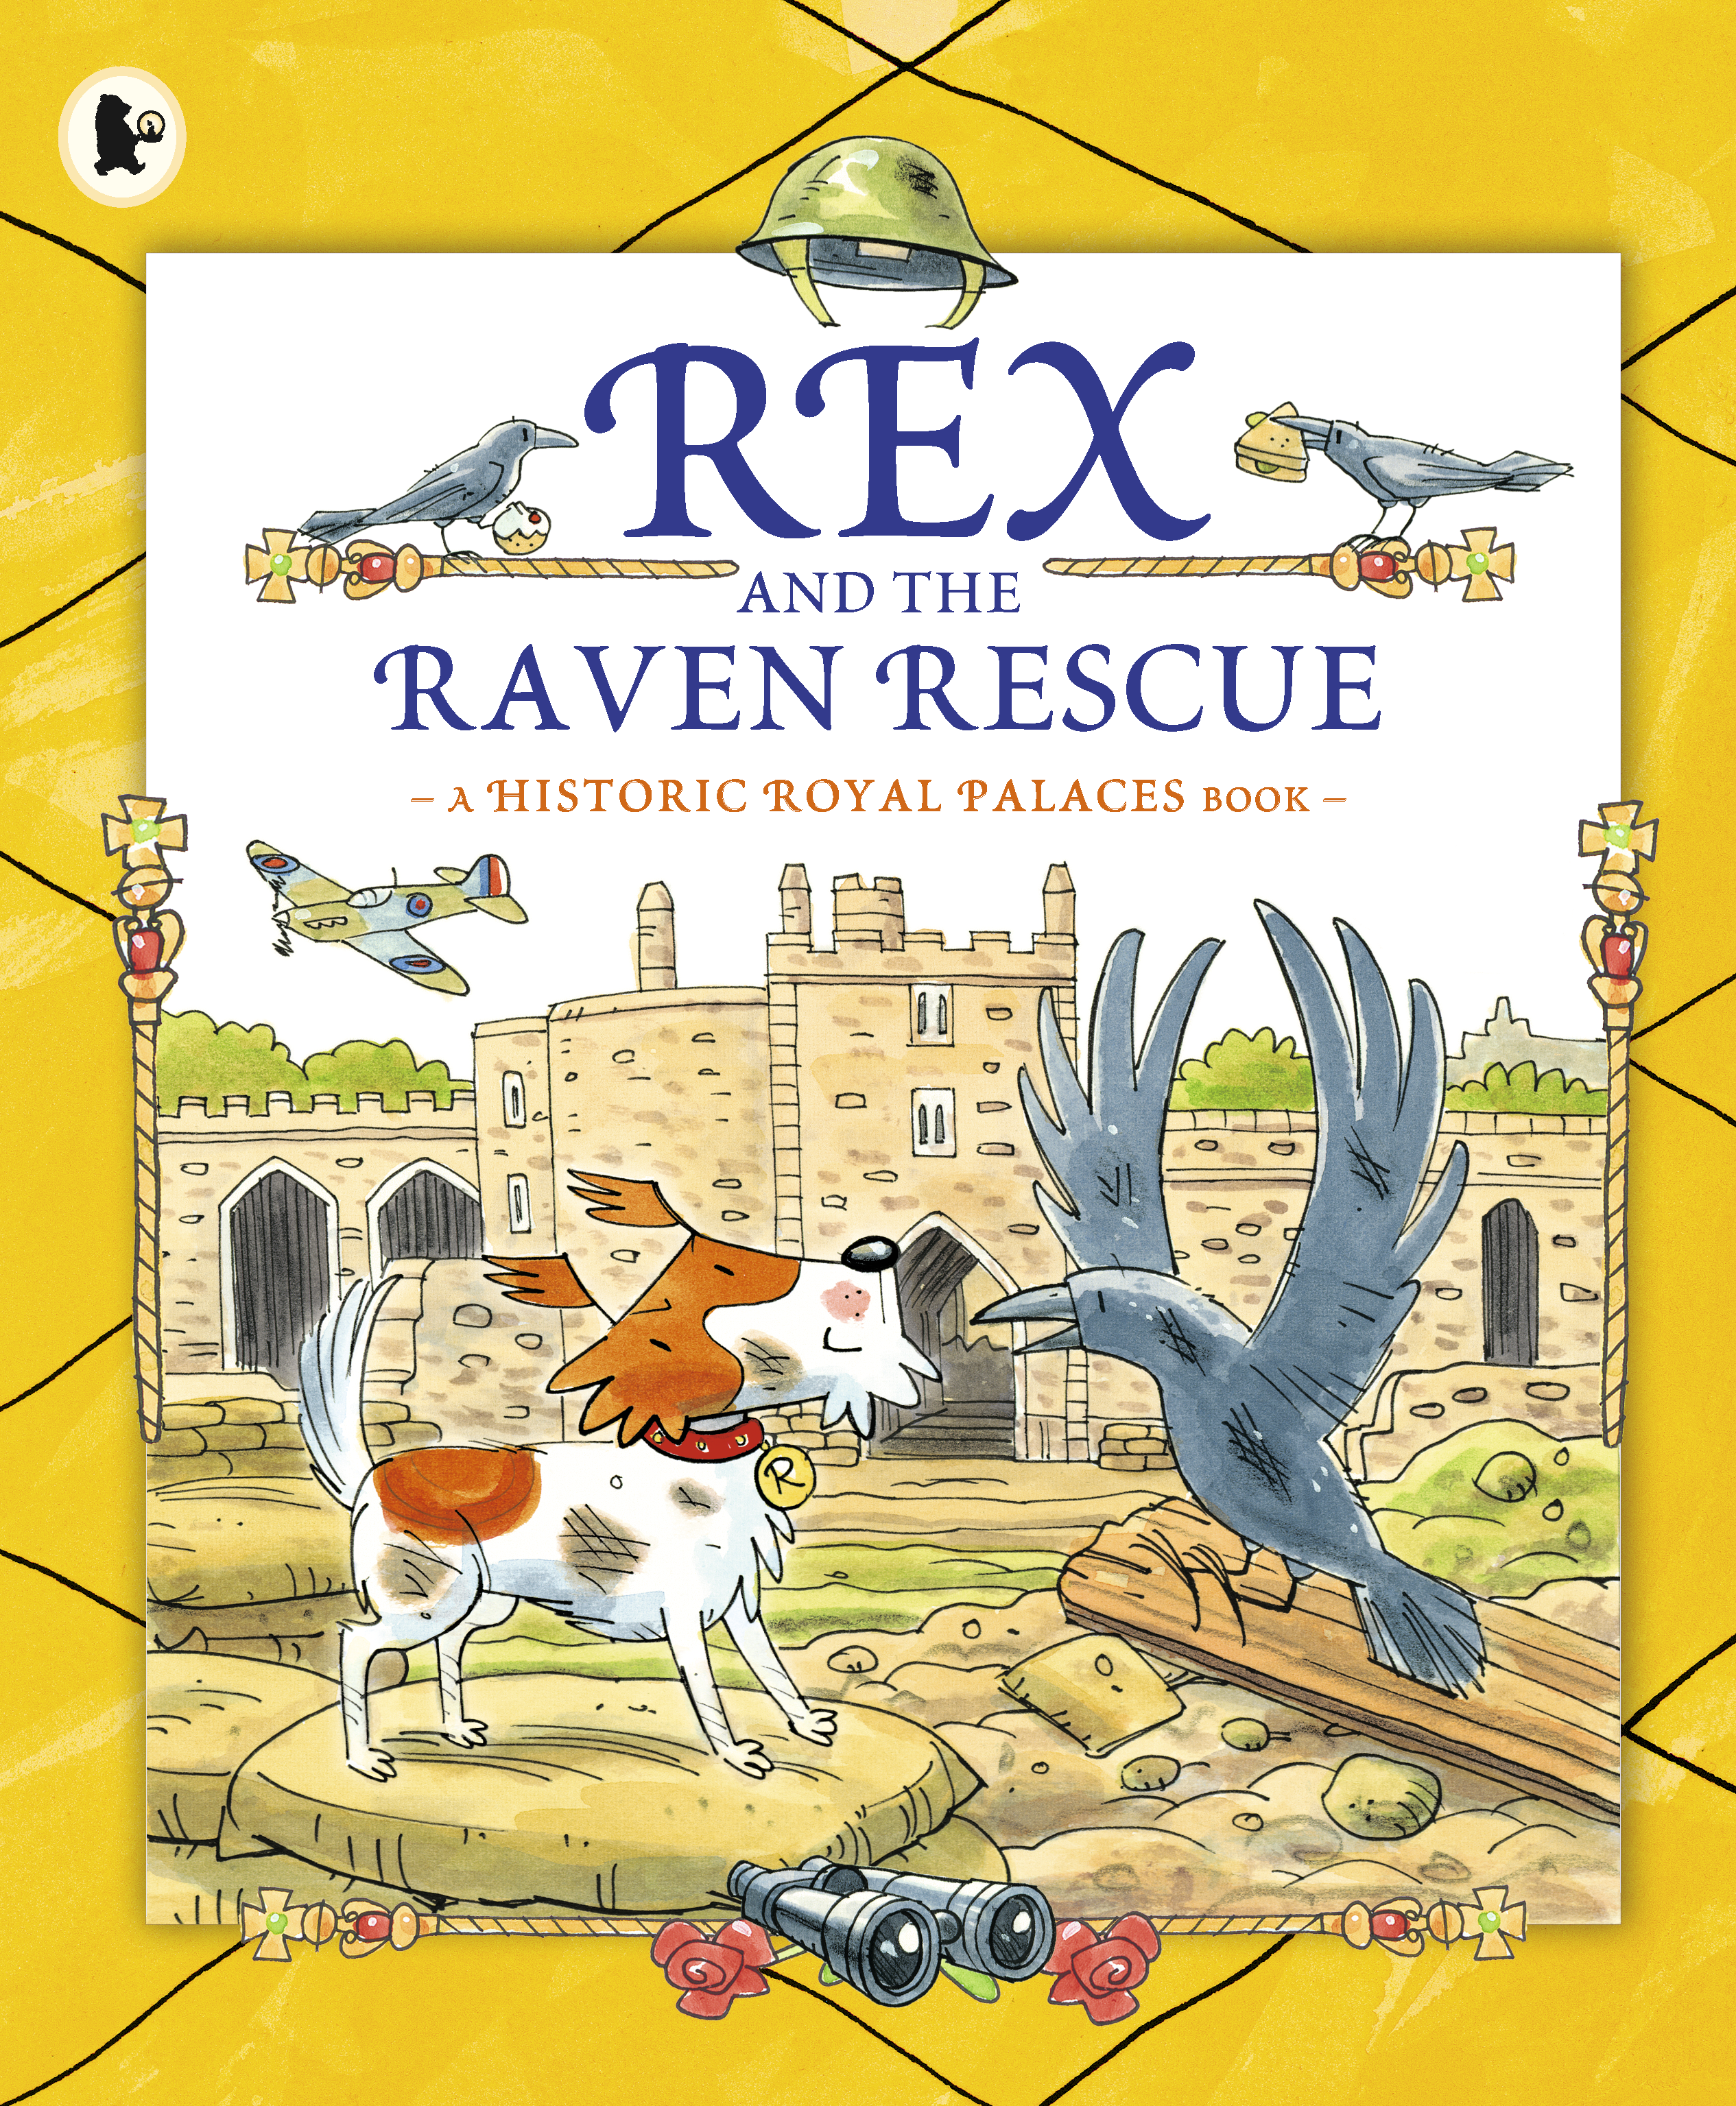 Rex-and-the-Raven-Rescue